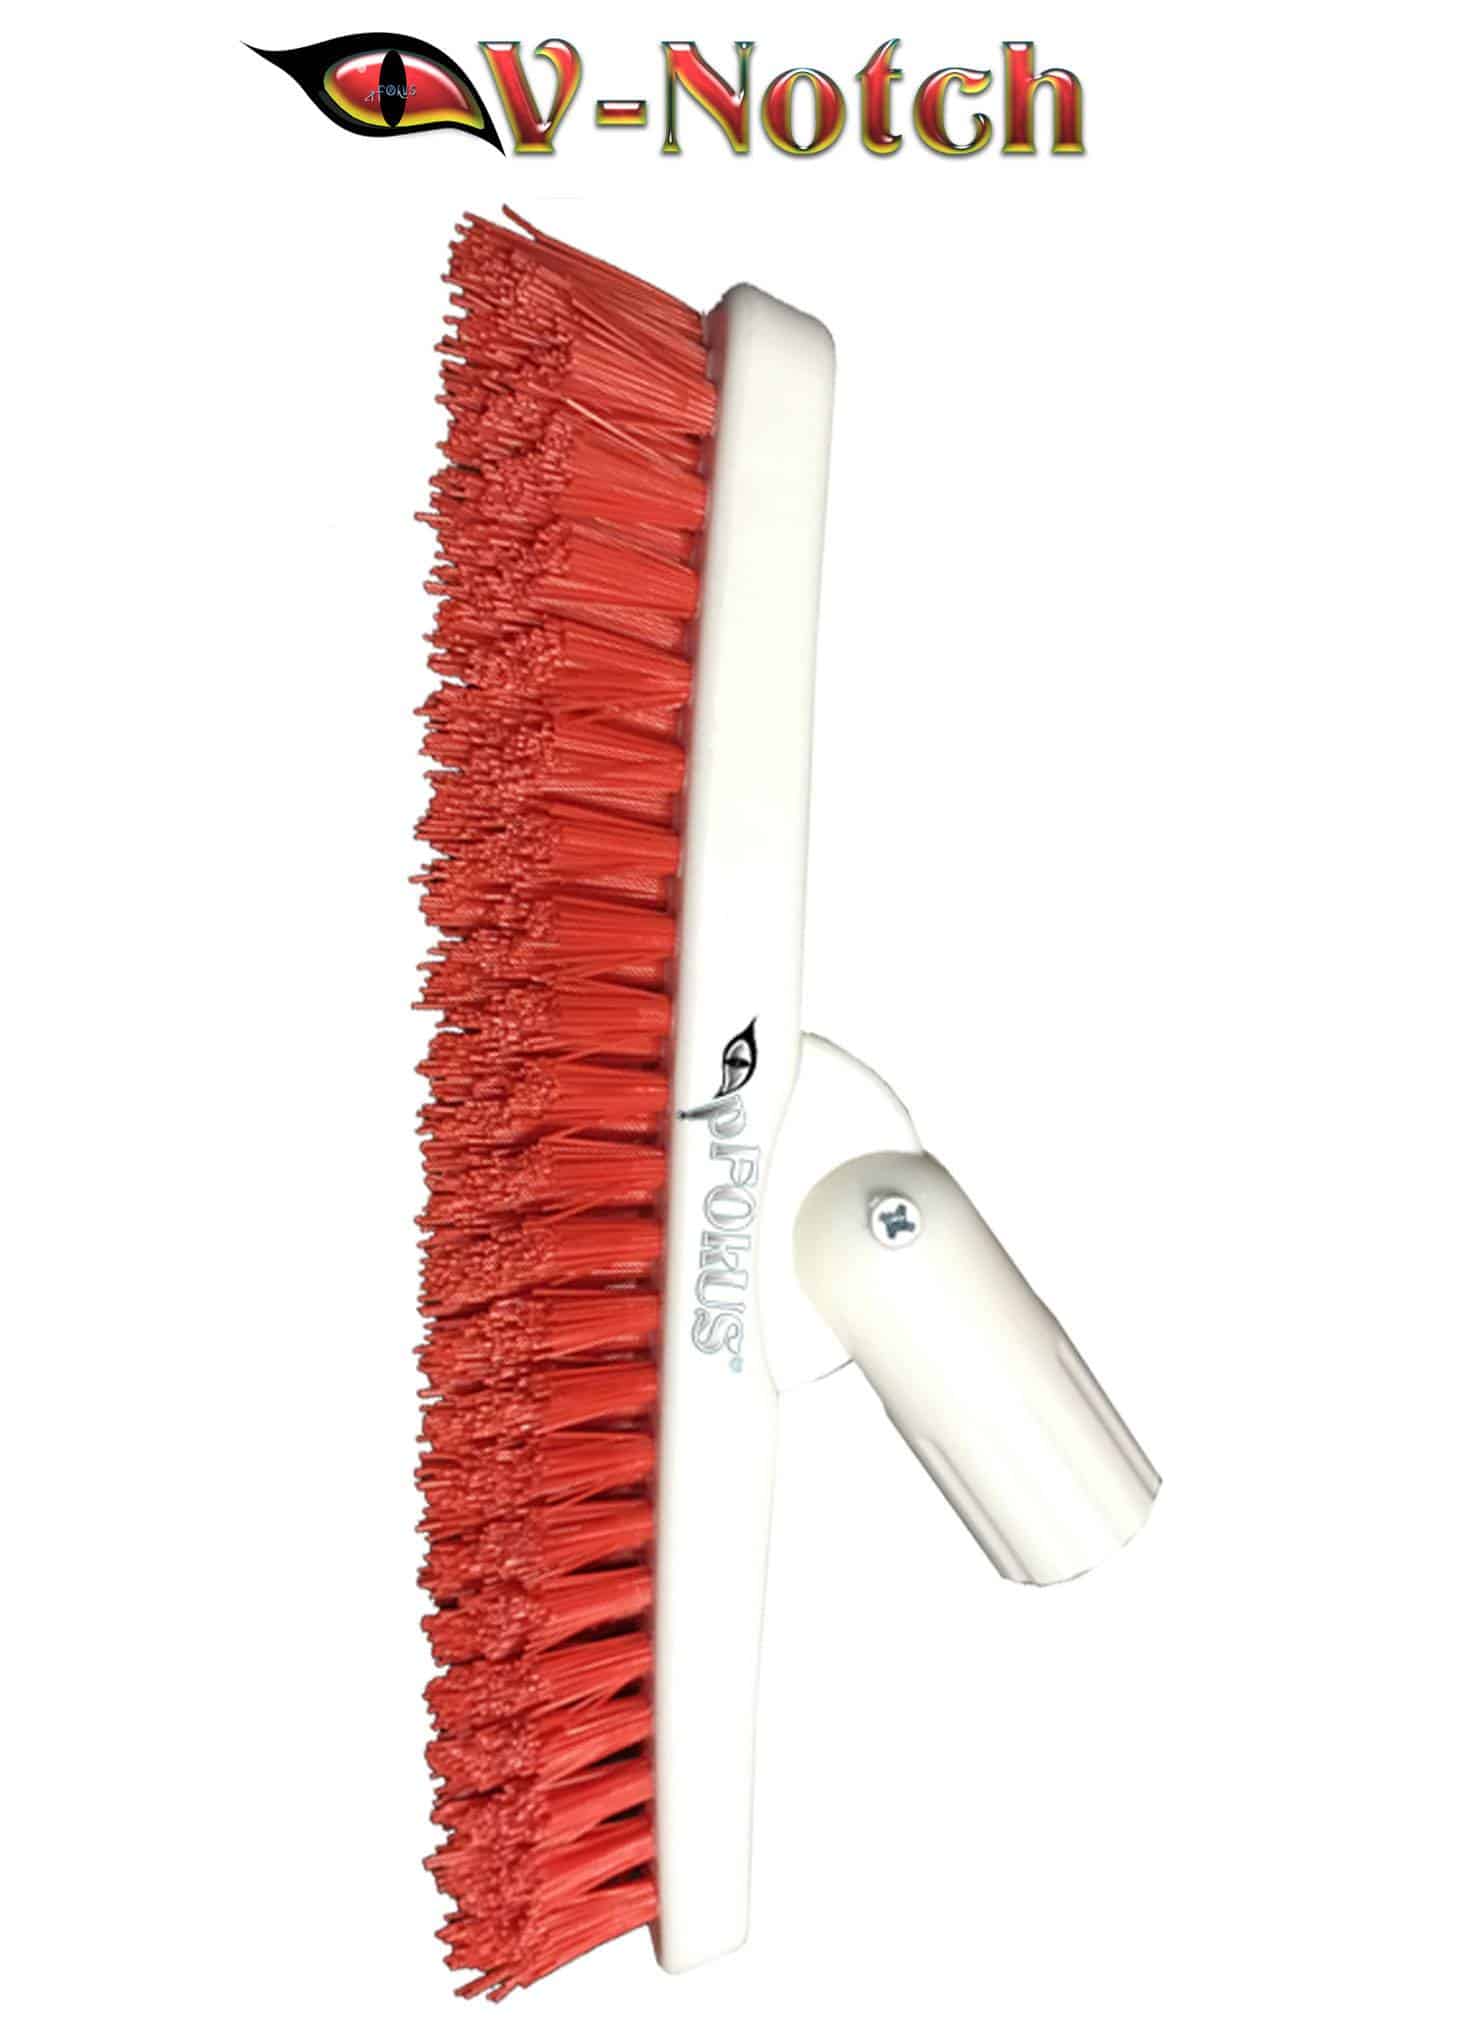 Quality Commerical tile grout cleaning brush corners